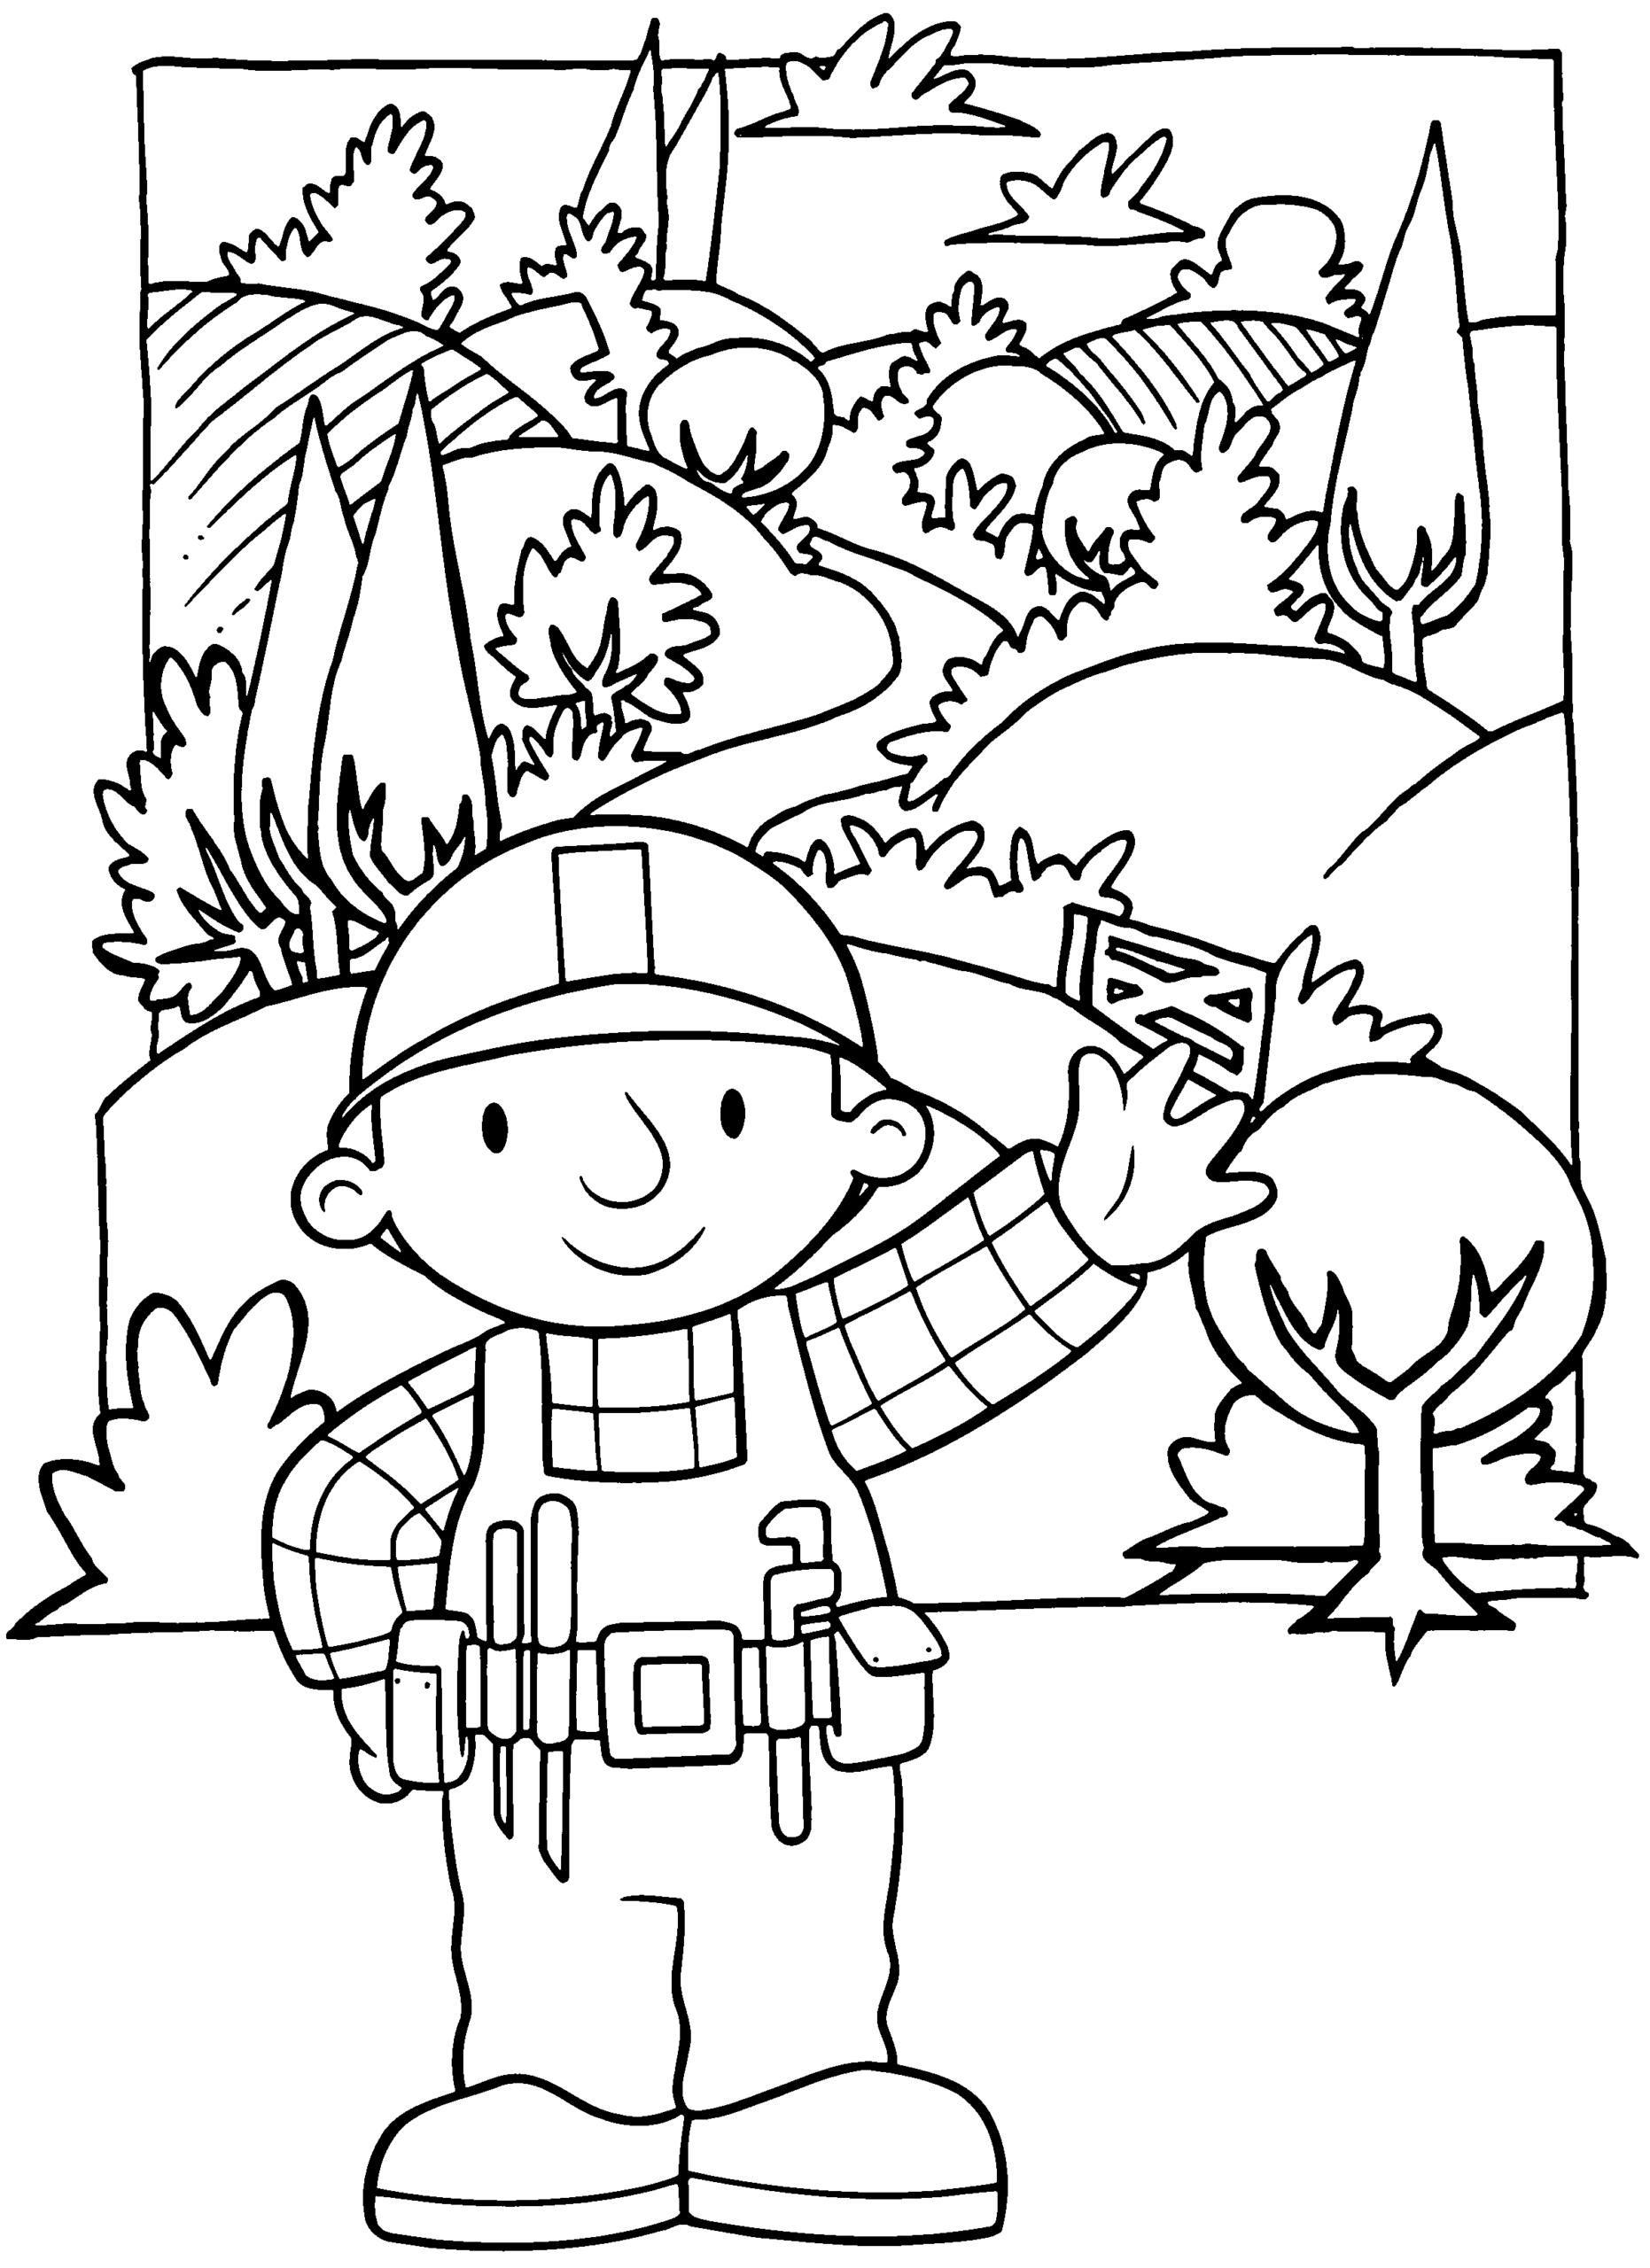 Bob the Builder Coloring Pages TV Film bob the builder 79 Printable 2020 01100 Coloring4free